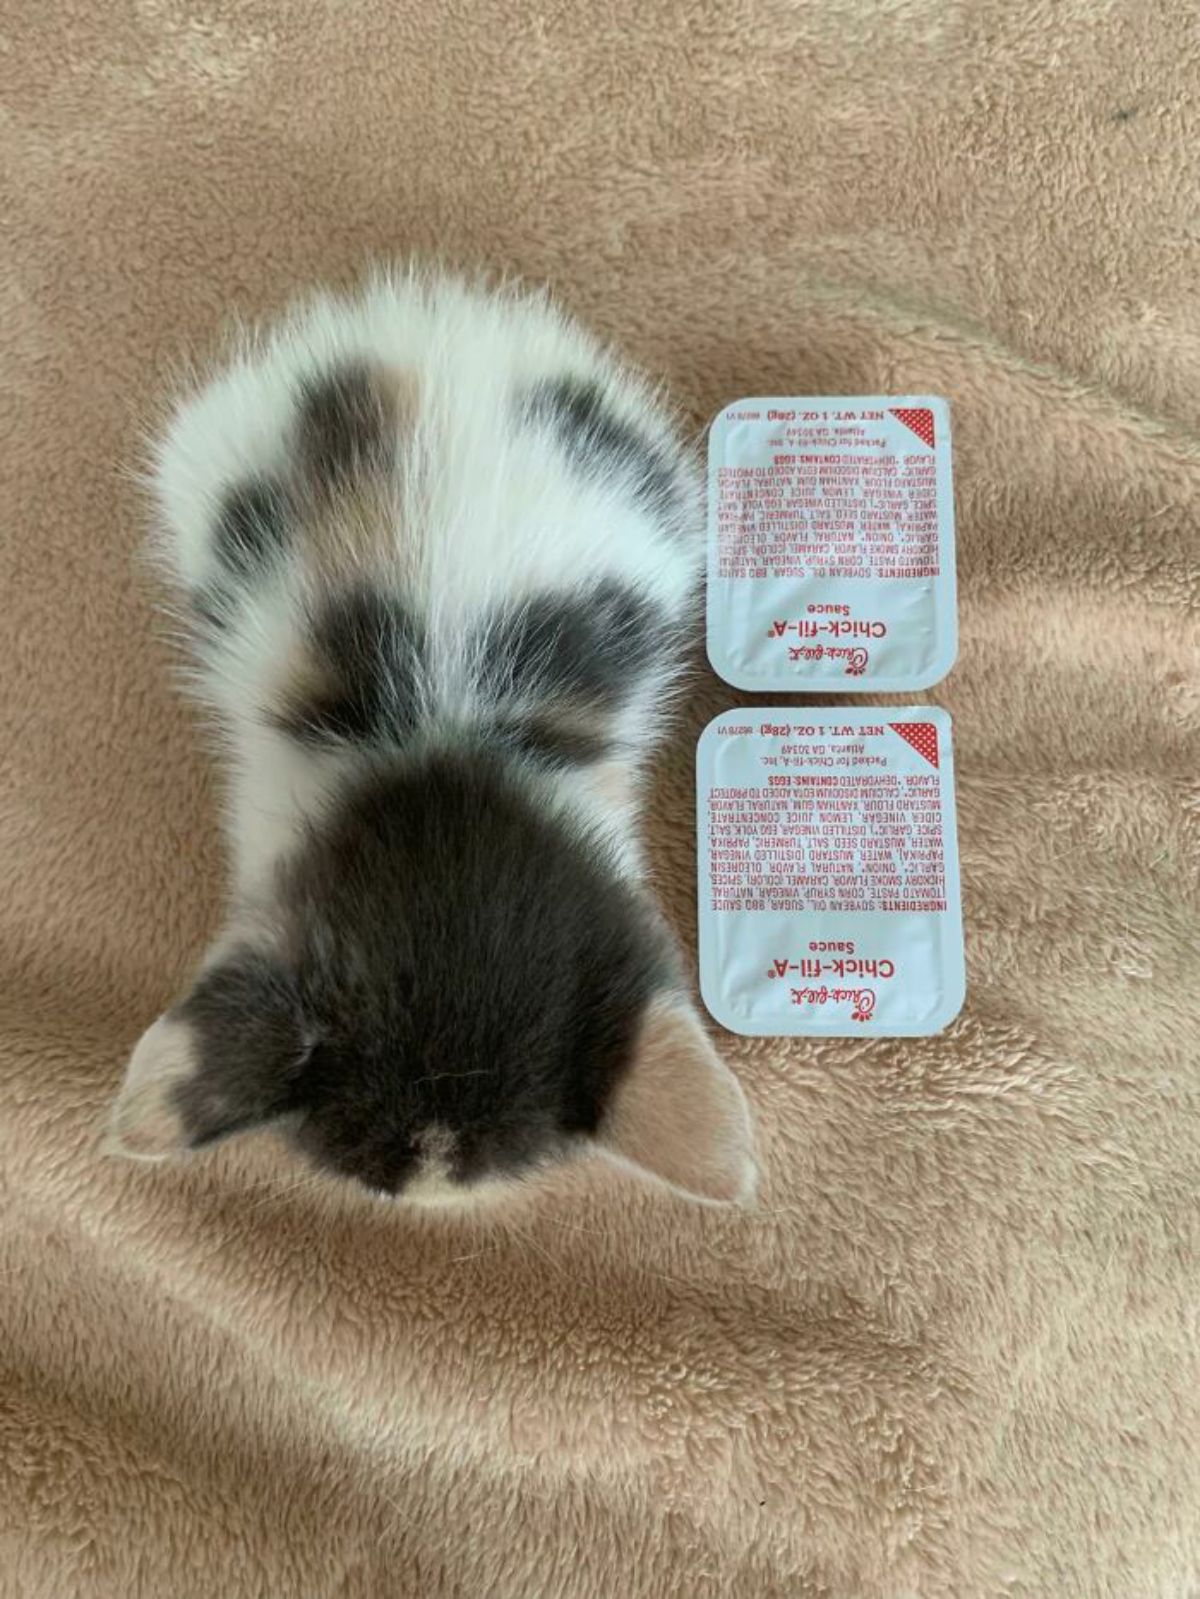 black white and orange kitten laying on a brown blanket next to two packs of chick-fil-a sauce